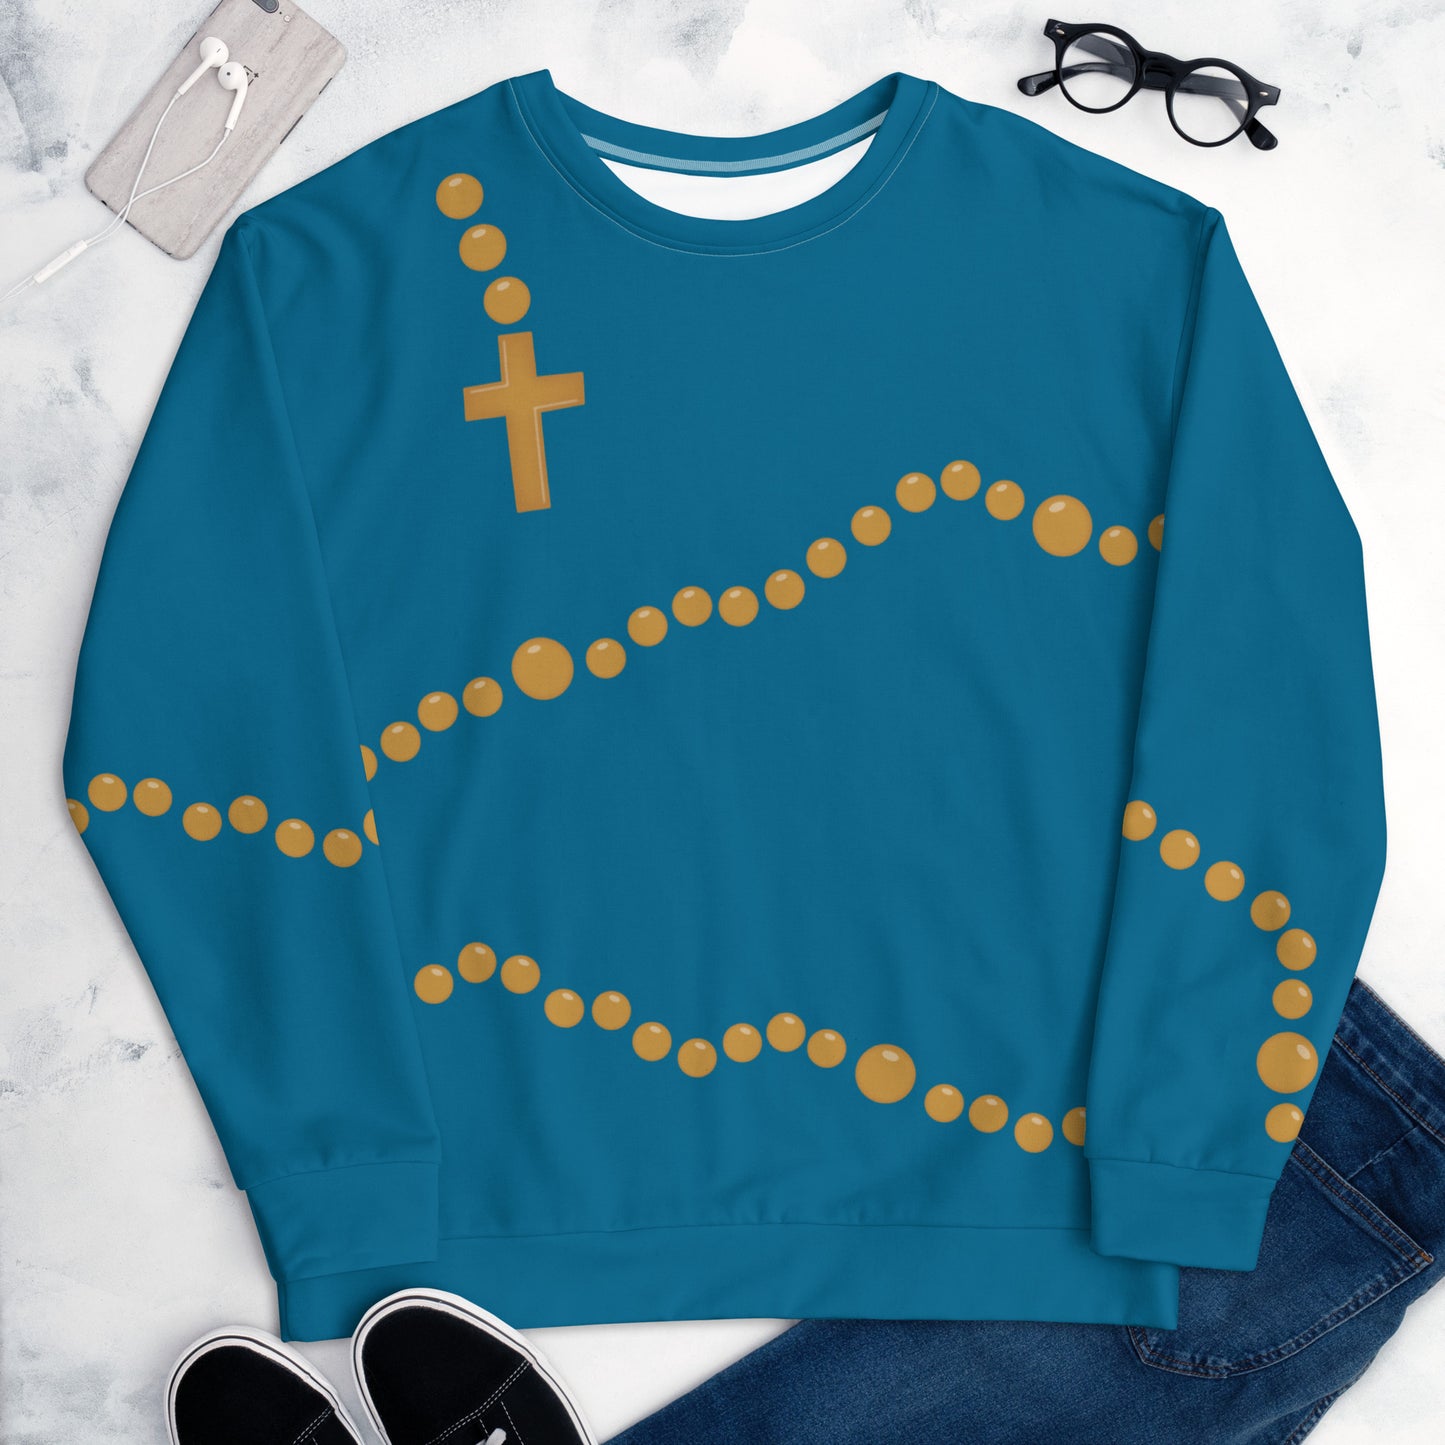 "Wrapped in My Rosary" - Unisex All-Over Sweatshirt